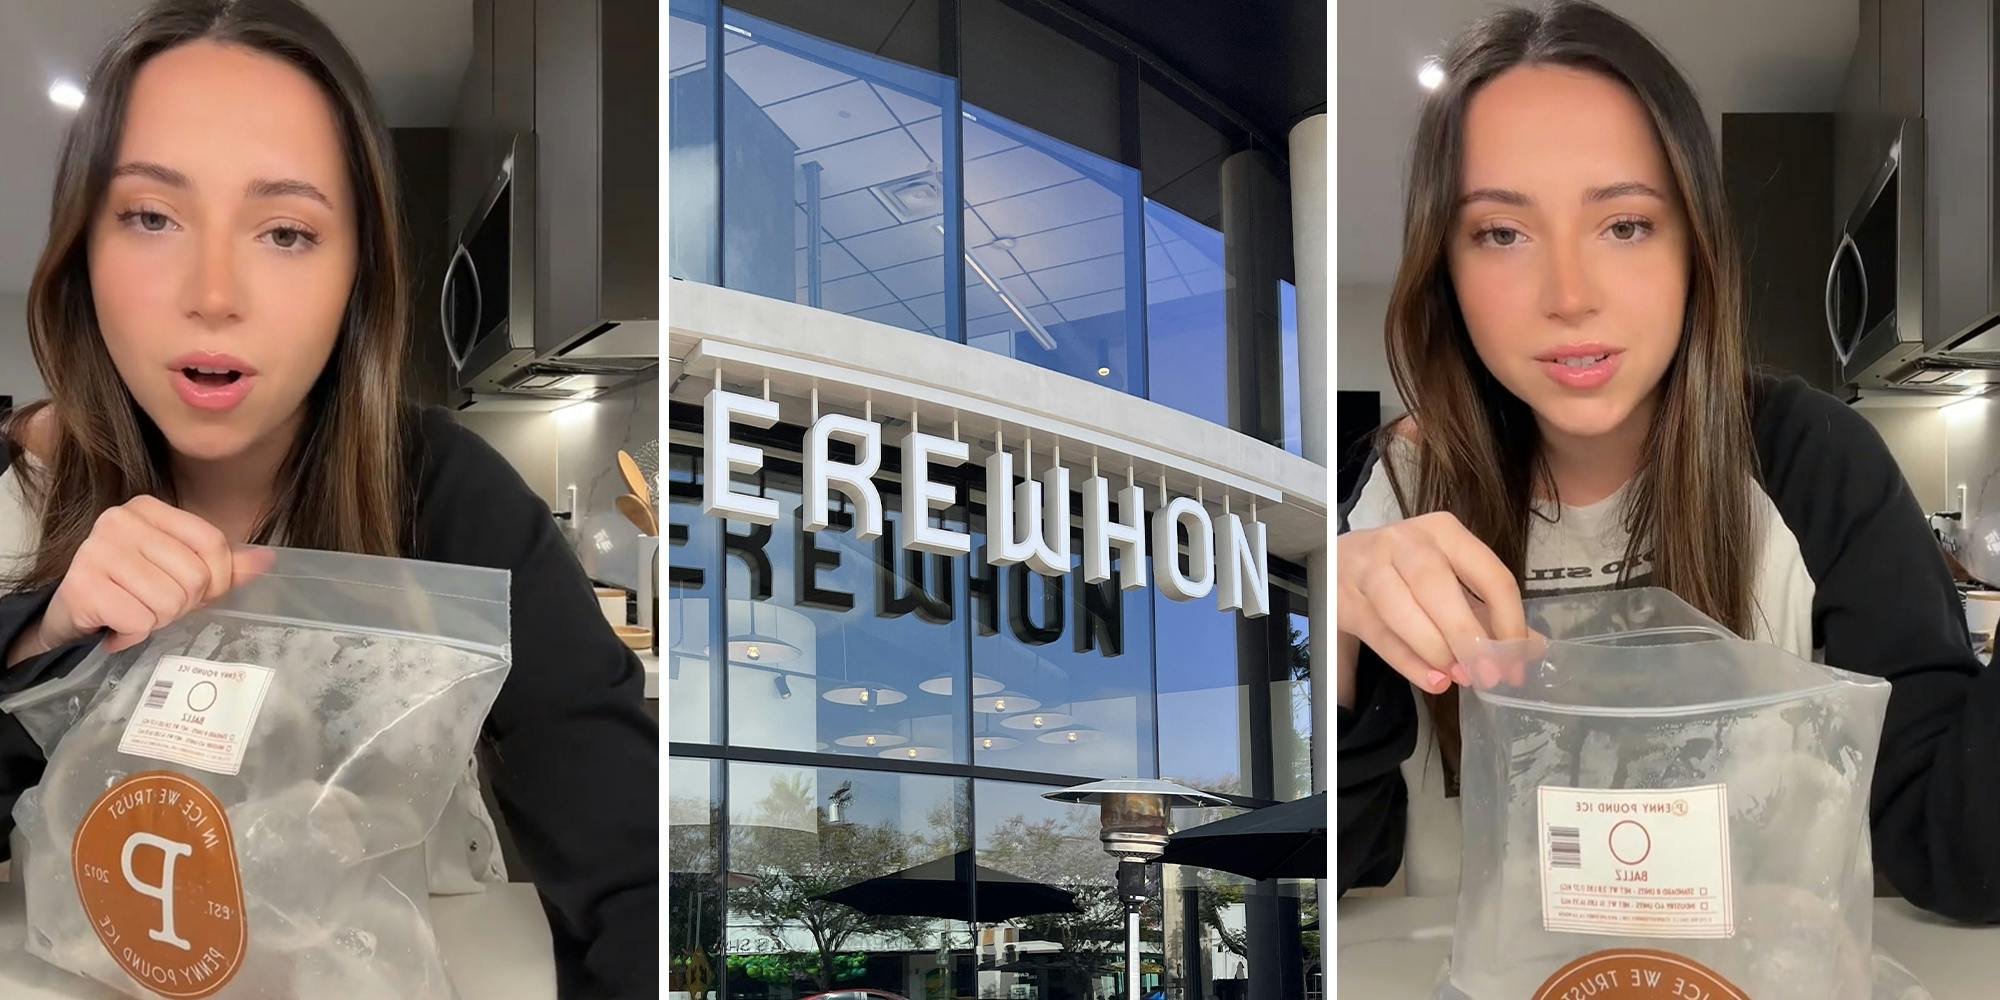 ‘$30 for frozen water?!’: Viewers split after woman buys ‘special’ ice balls from Erewhon